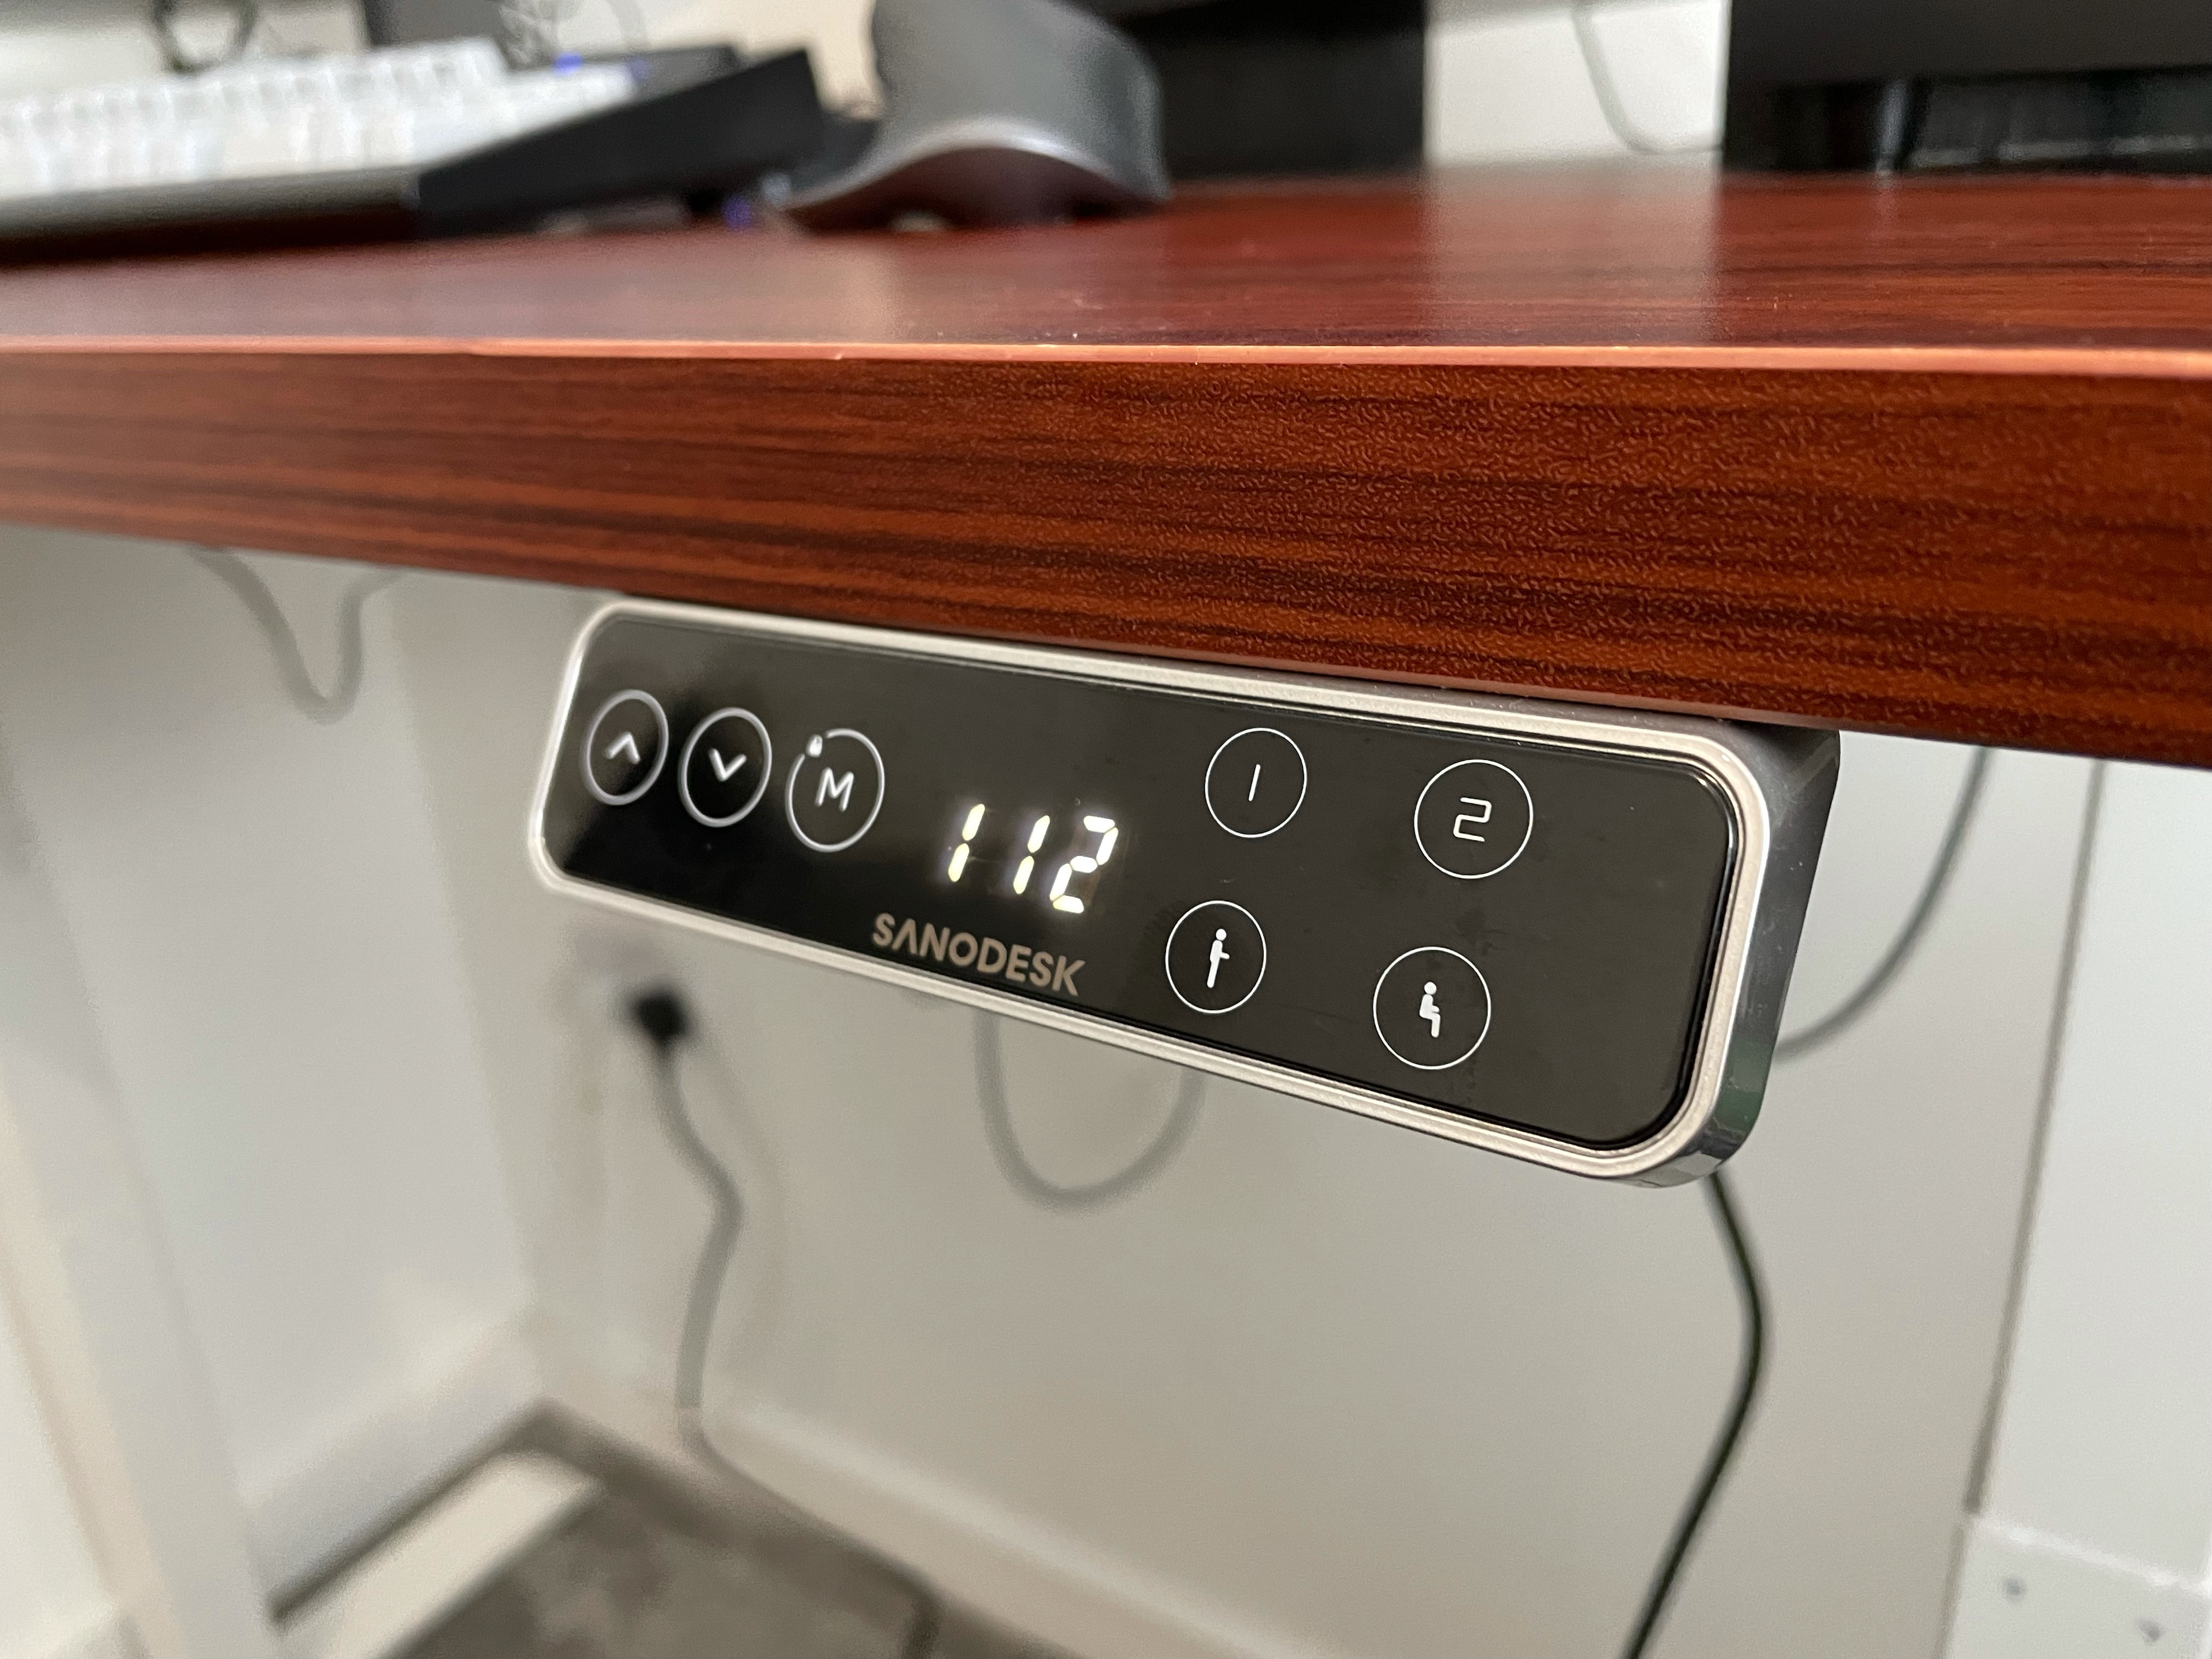 FlexiSpot E7 Pro Plus Standing Desk Review: Sit or Stand